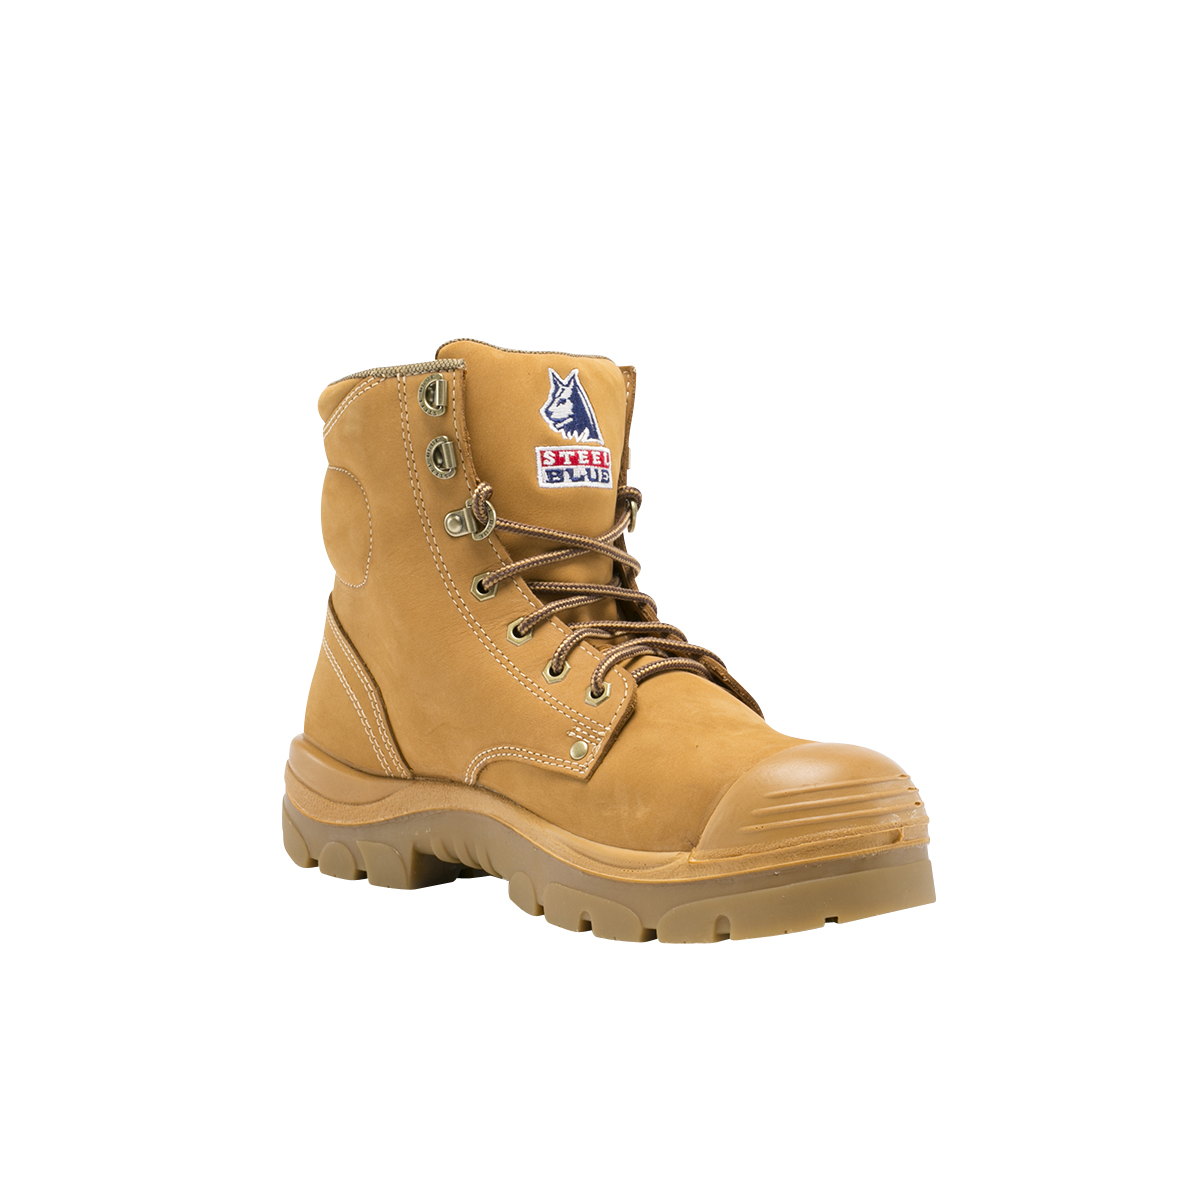 SAFETY BOOT ARGYLE BUMPCAP S10 ANKLE LACE UP WHEAT NITRILE